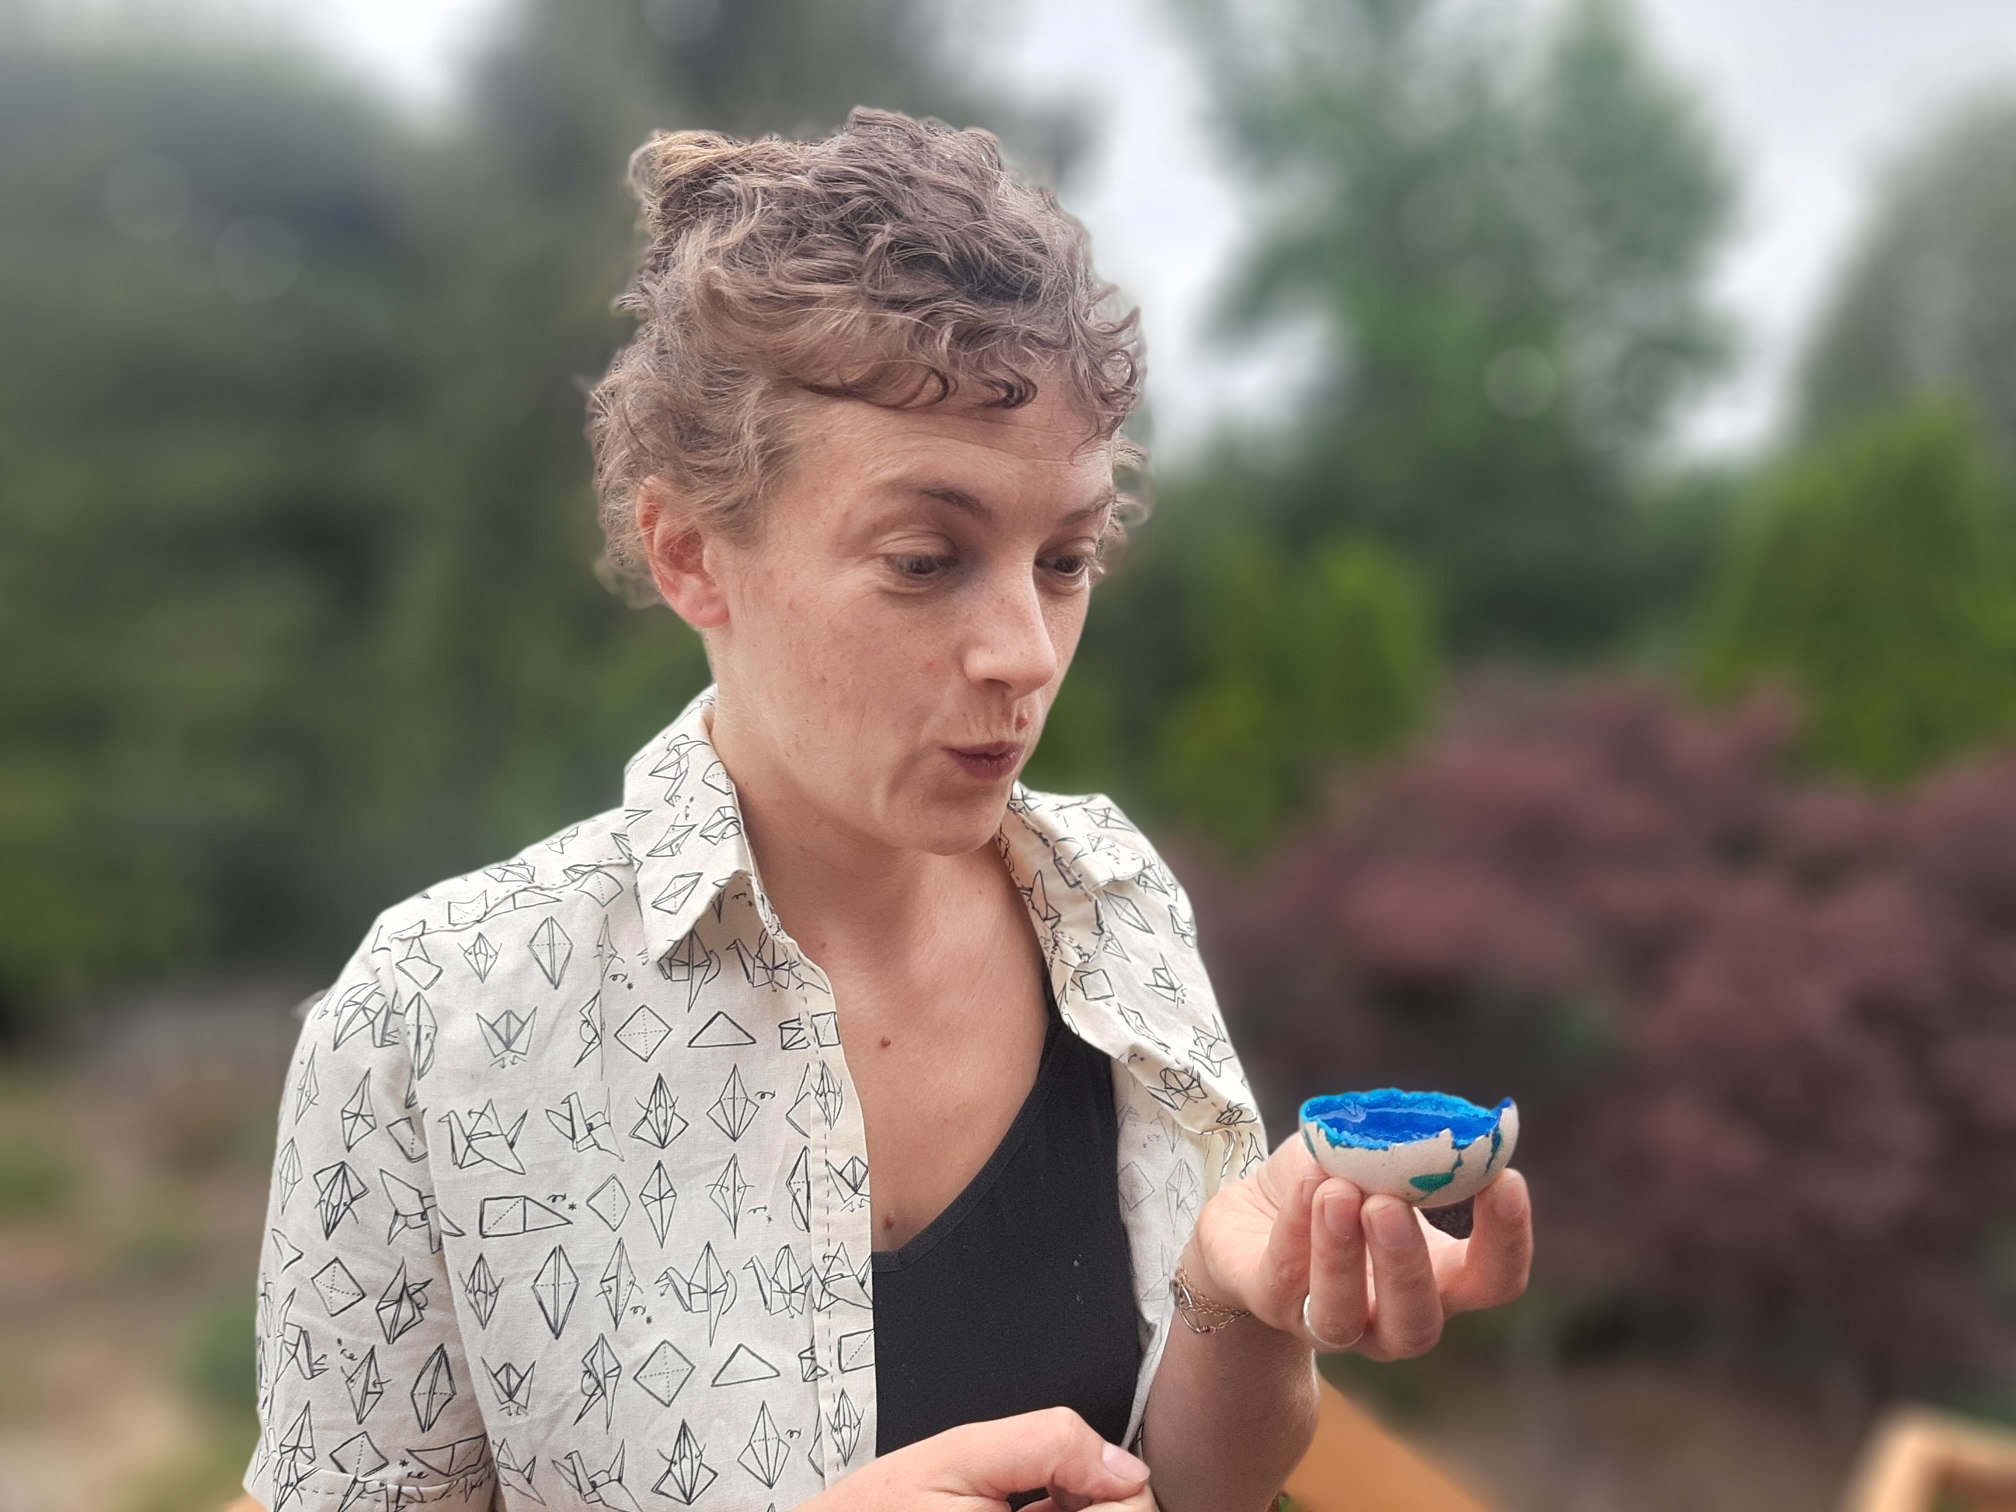 Your course instructor, a white woman in her 30s with curly hair wearing a shirt with an origami print, is looking surprised by an eggshell with something crystallised and blue in it.